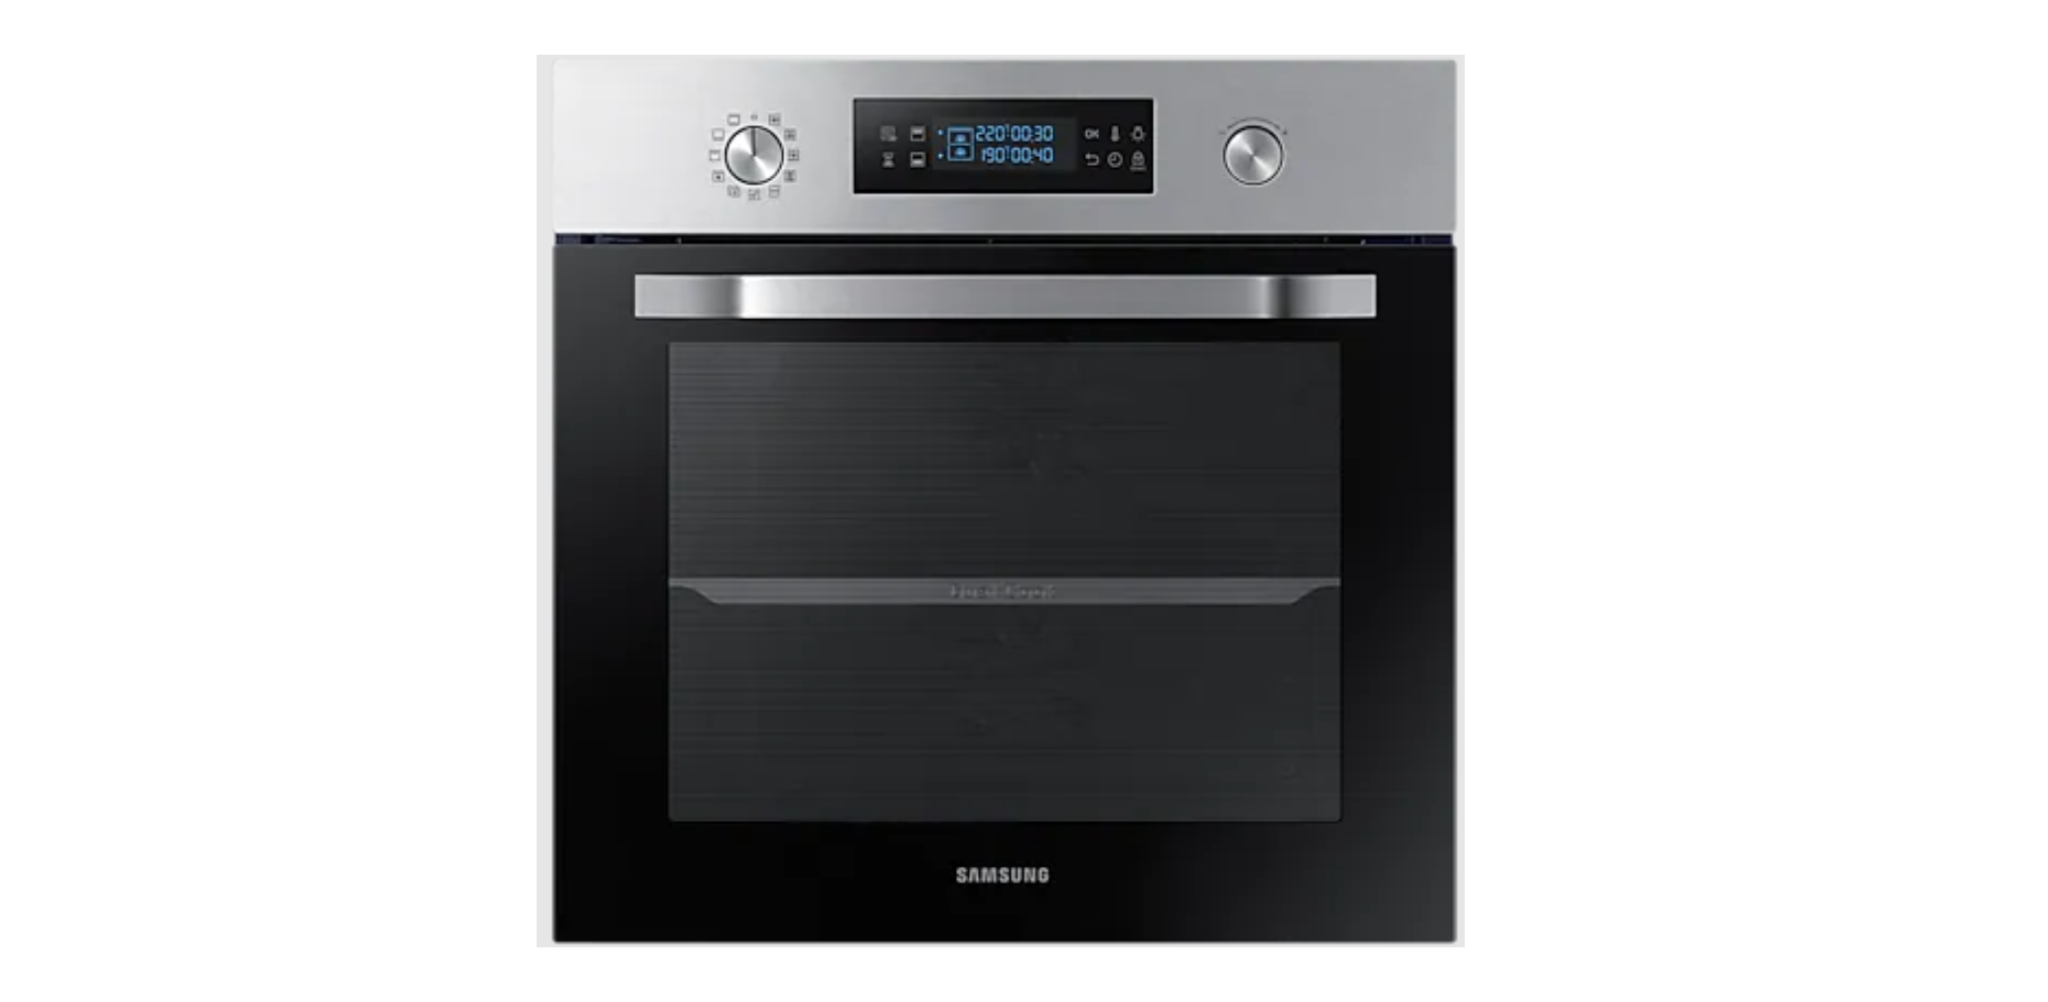 NV7B500 Series Built In Oven